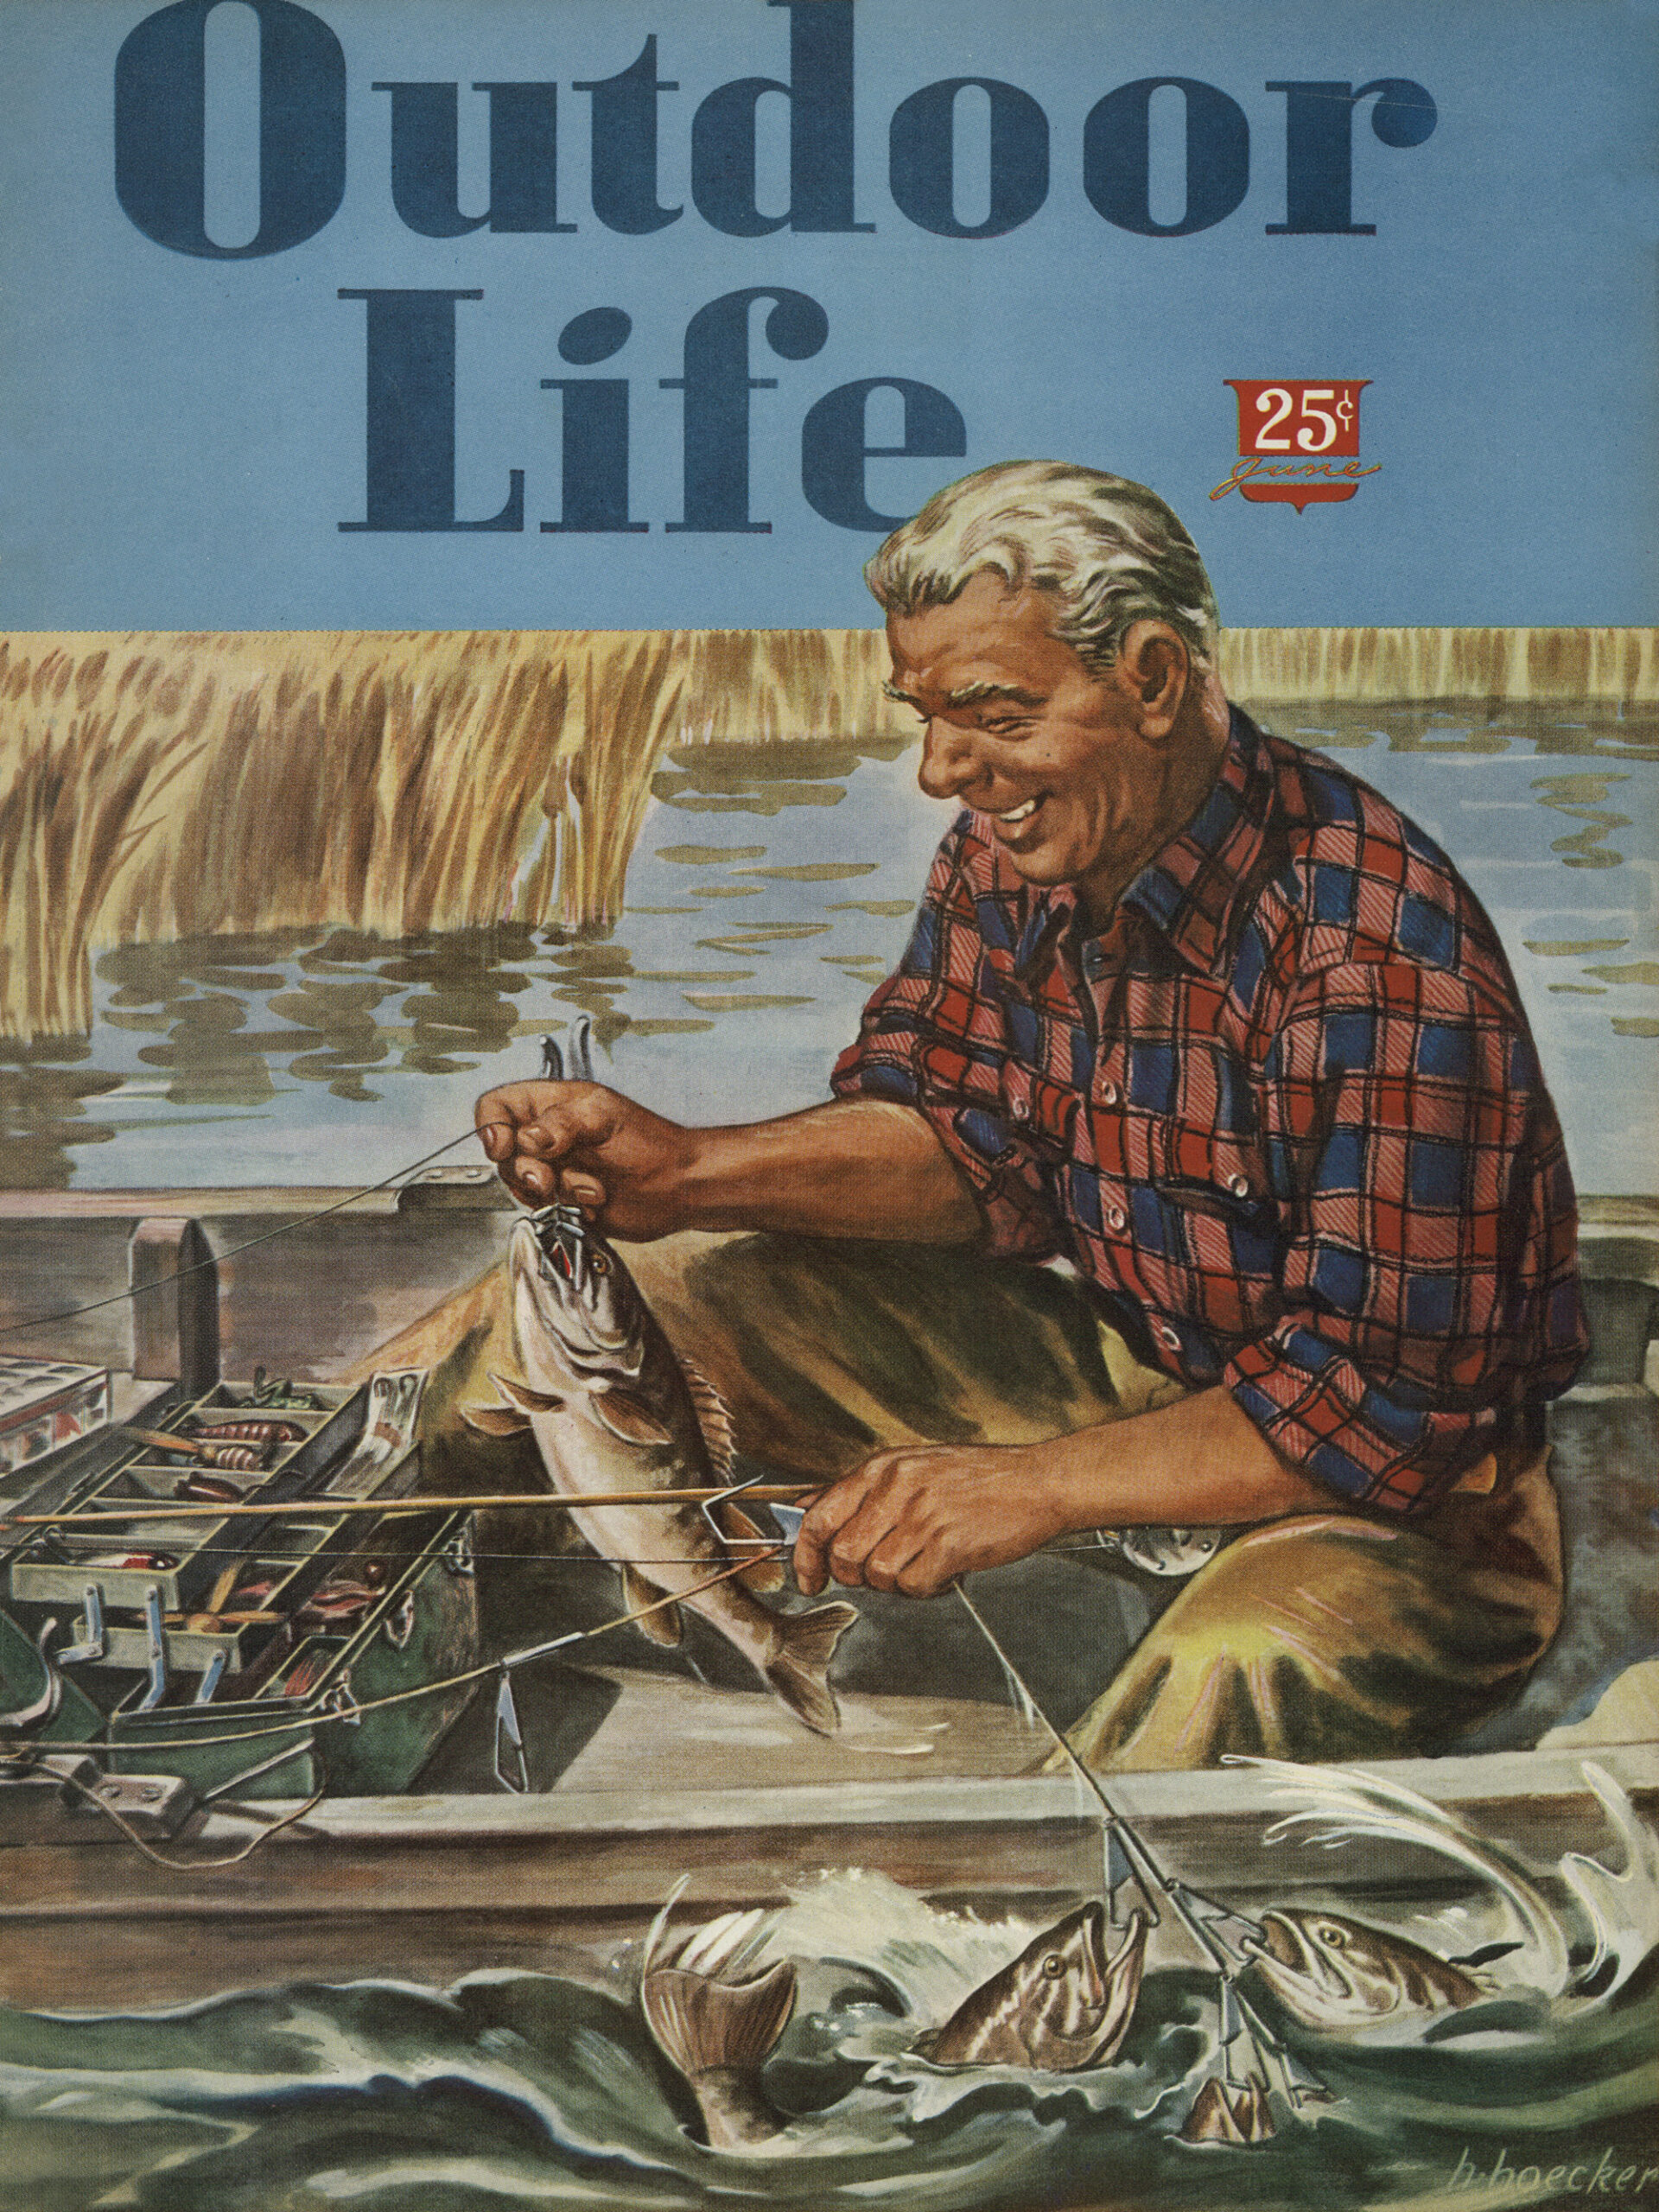 A man in a plaid shirt fishing for the June 1947 cover of outdoor life.